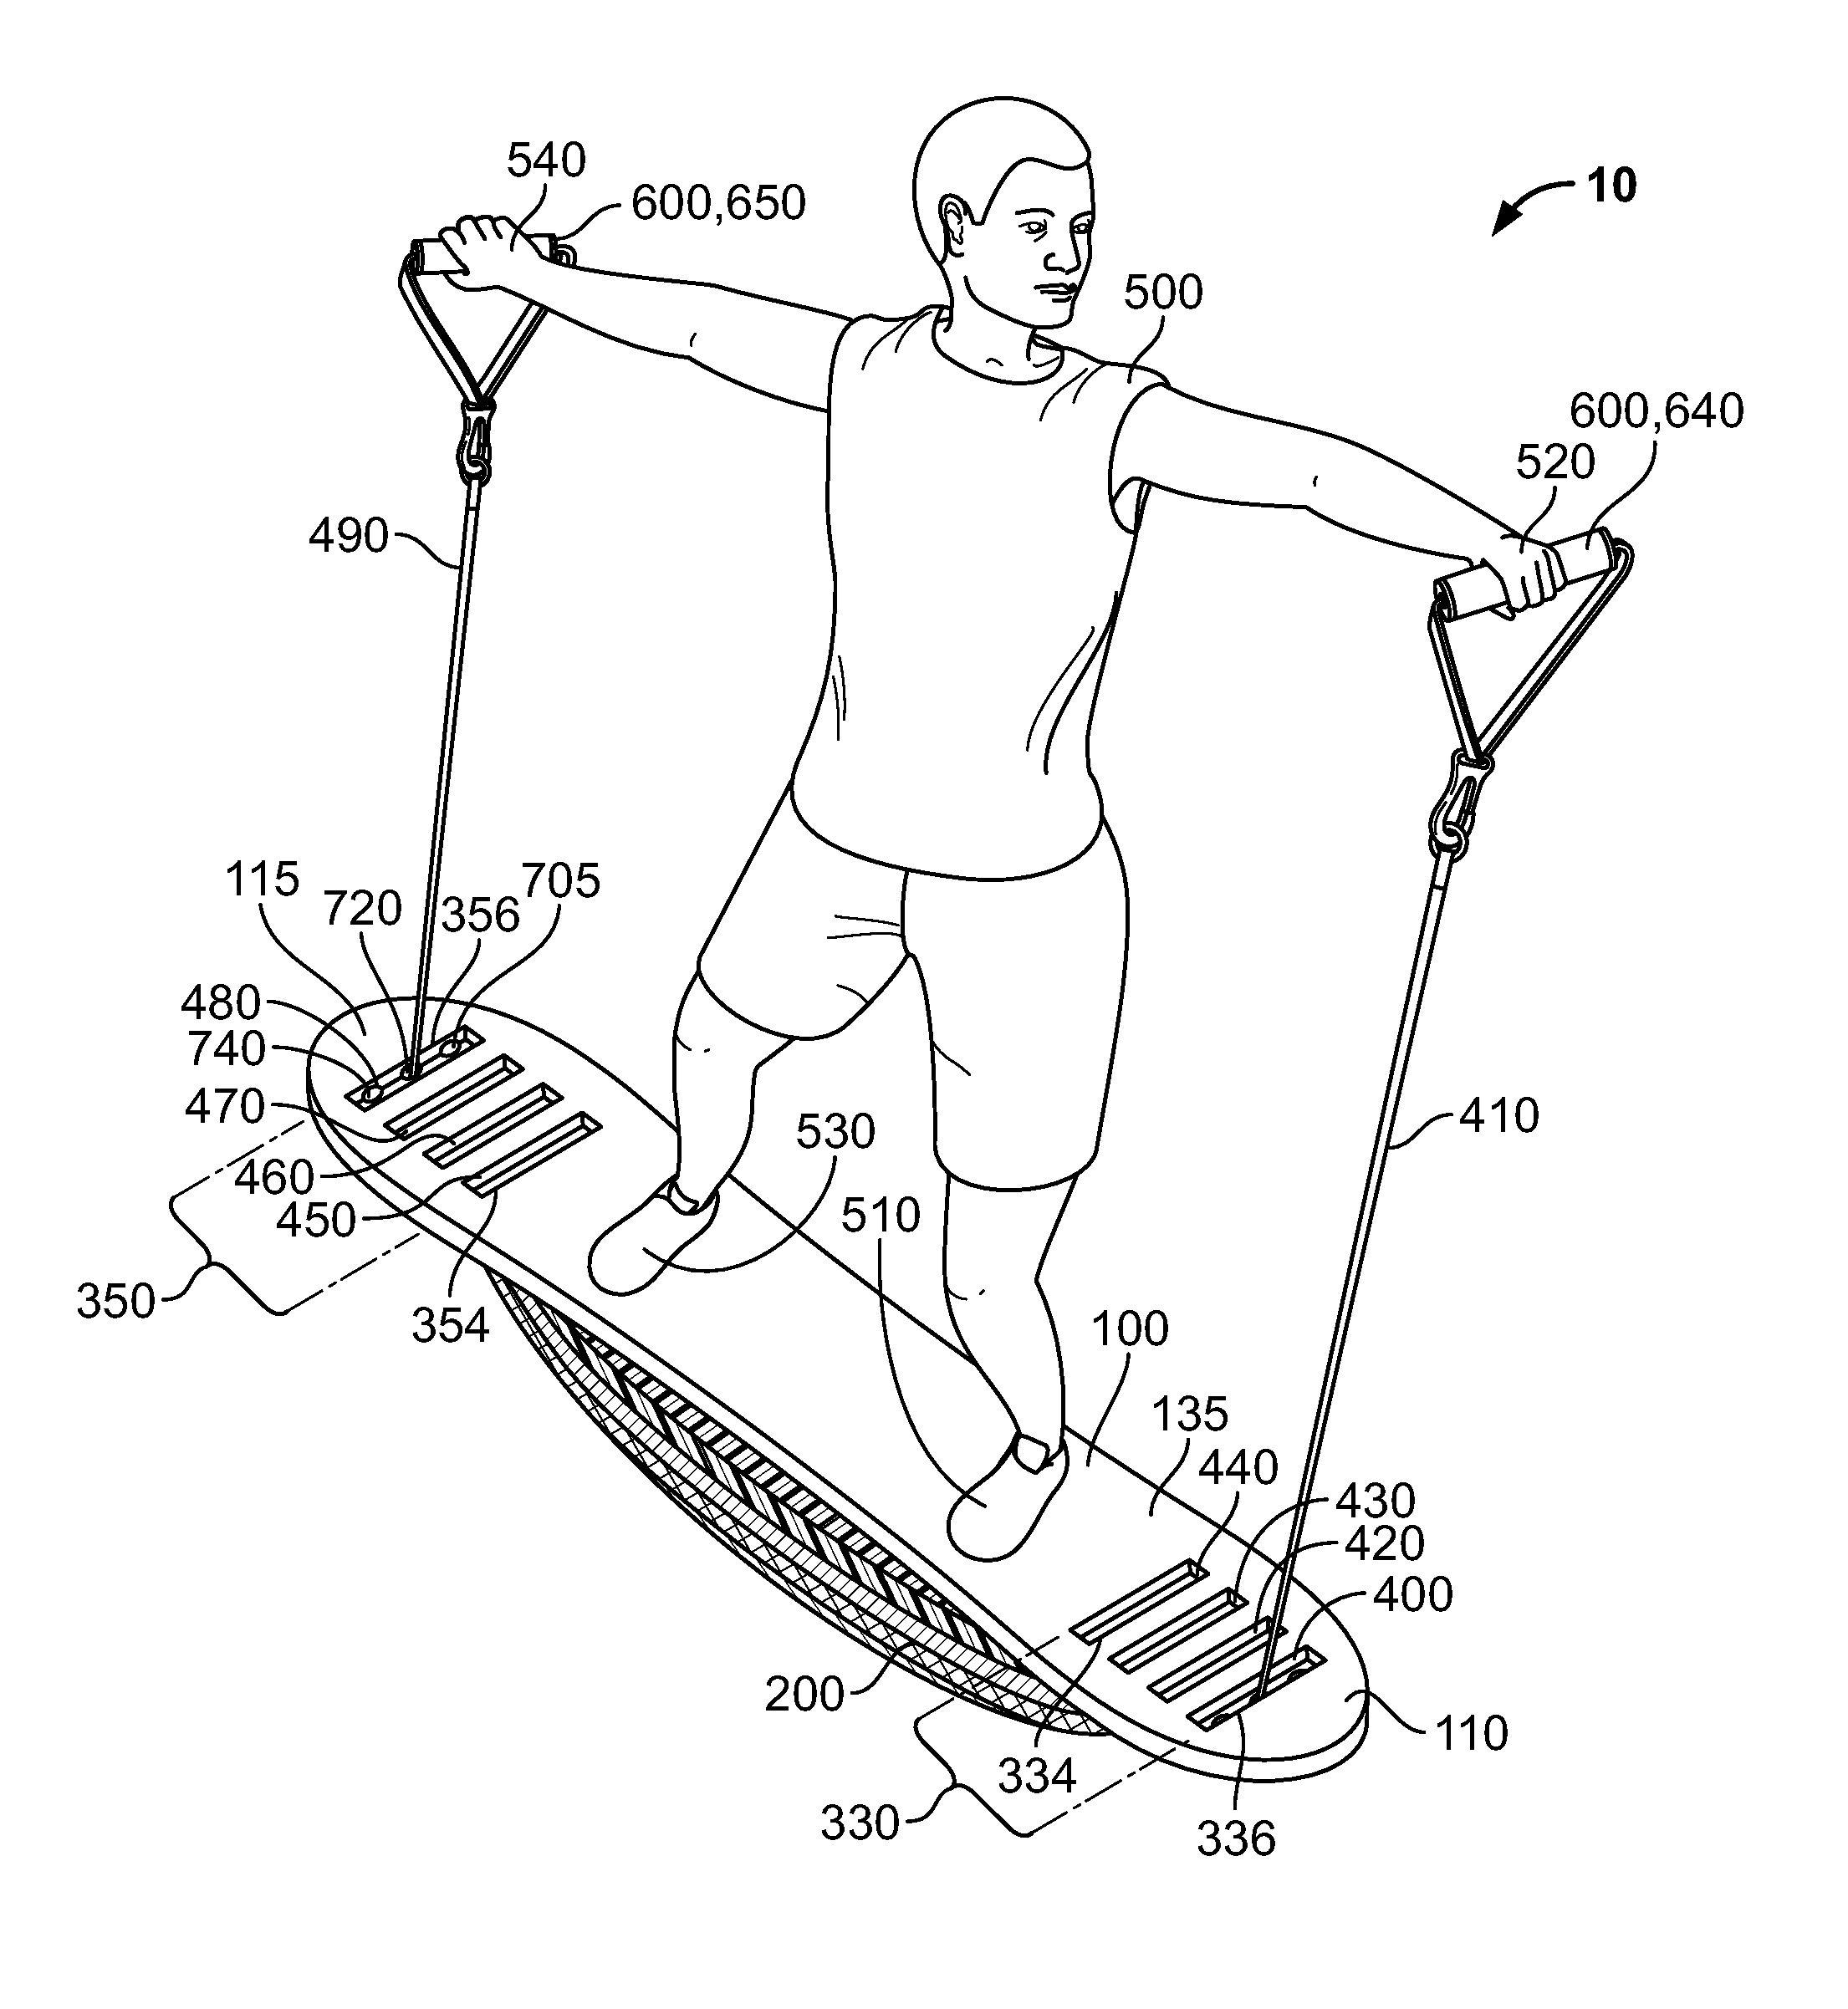 Agility and strength improvement apparatus